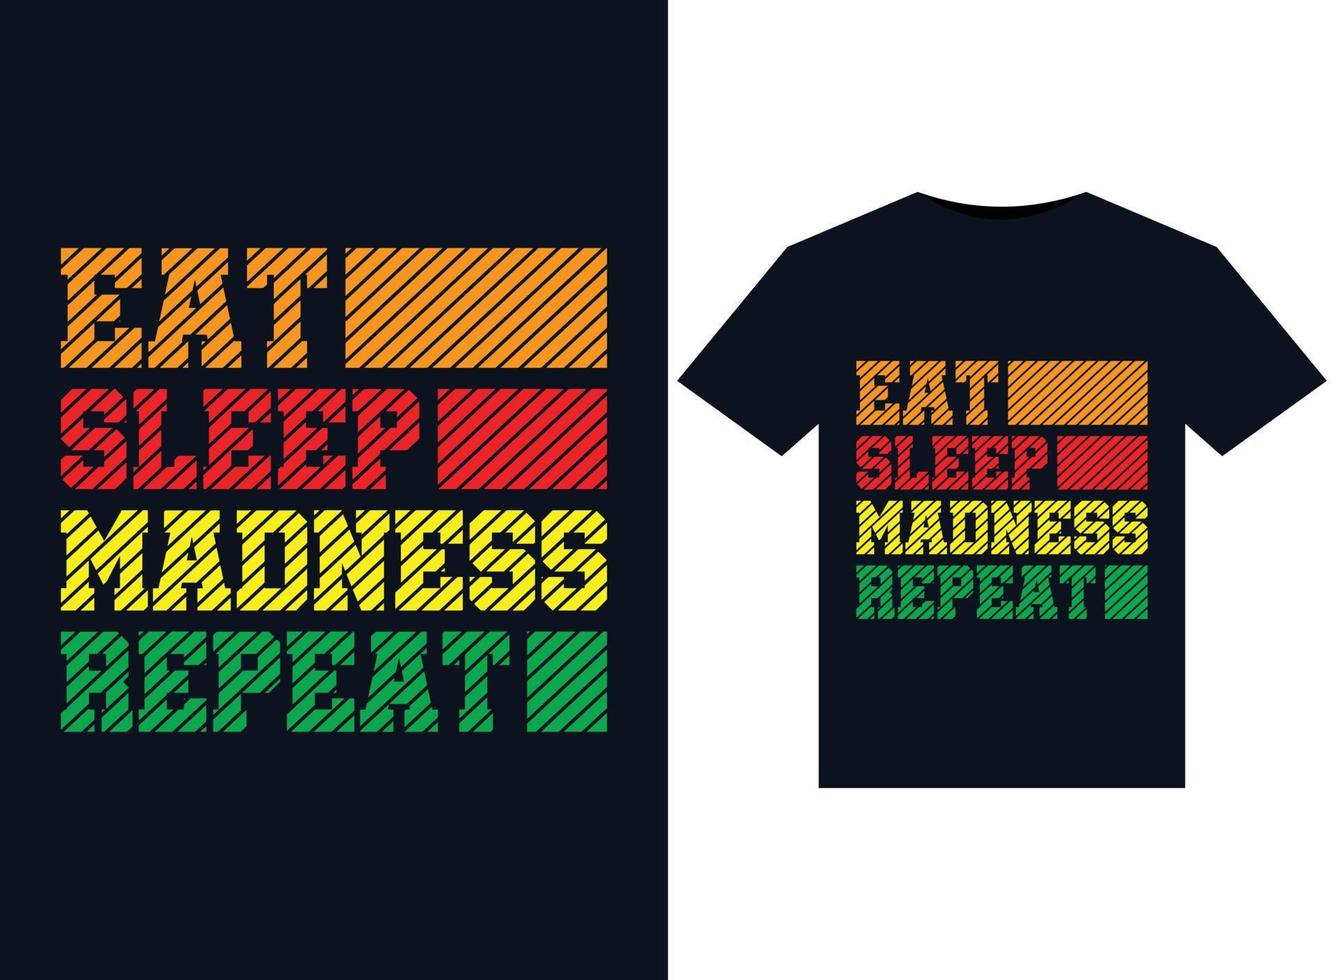 Eat Sleep Madness Repeat illustrations for print-ready T-Shirts design vector